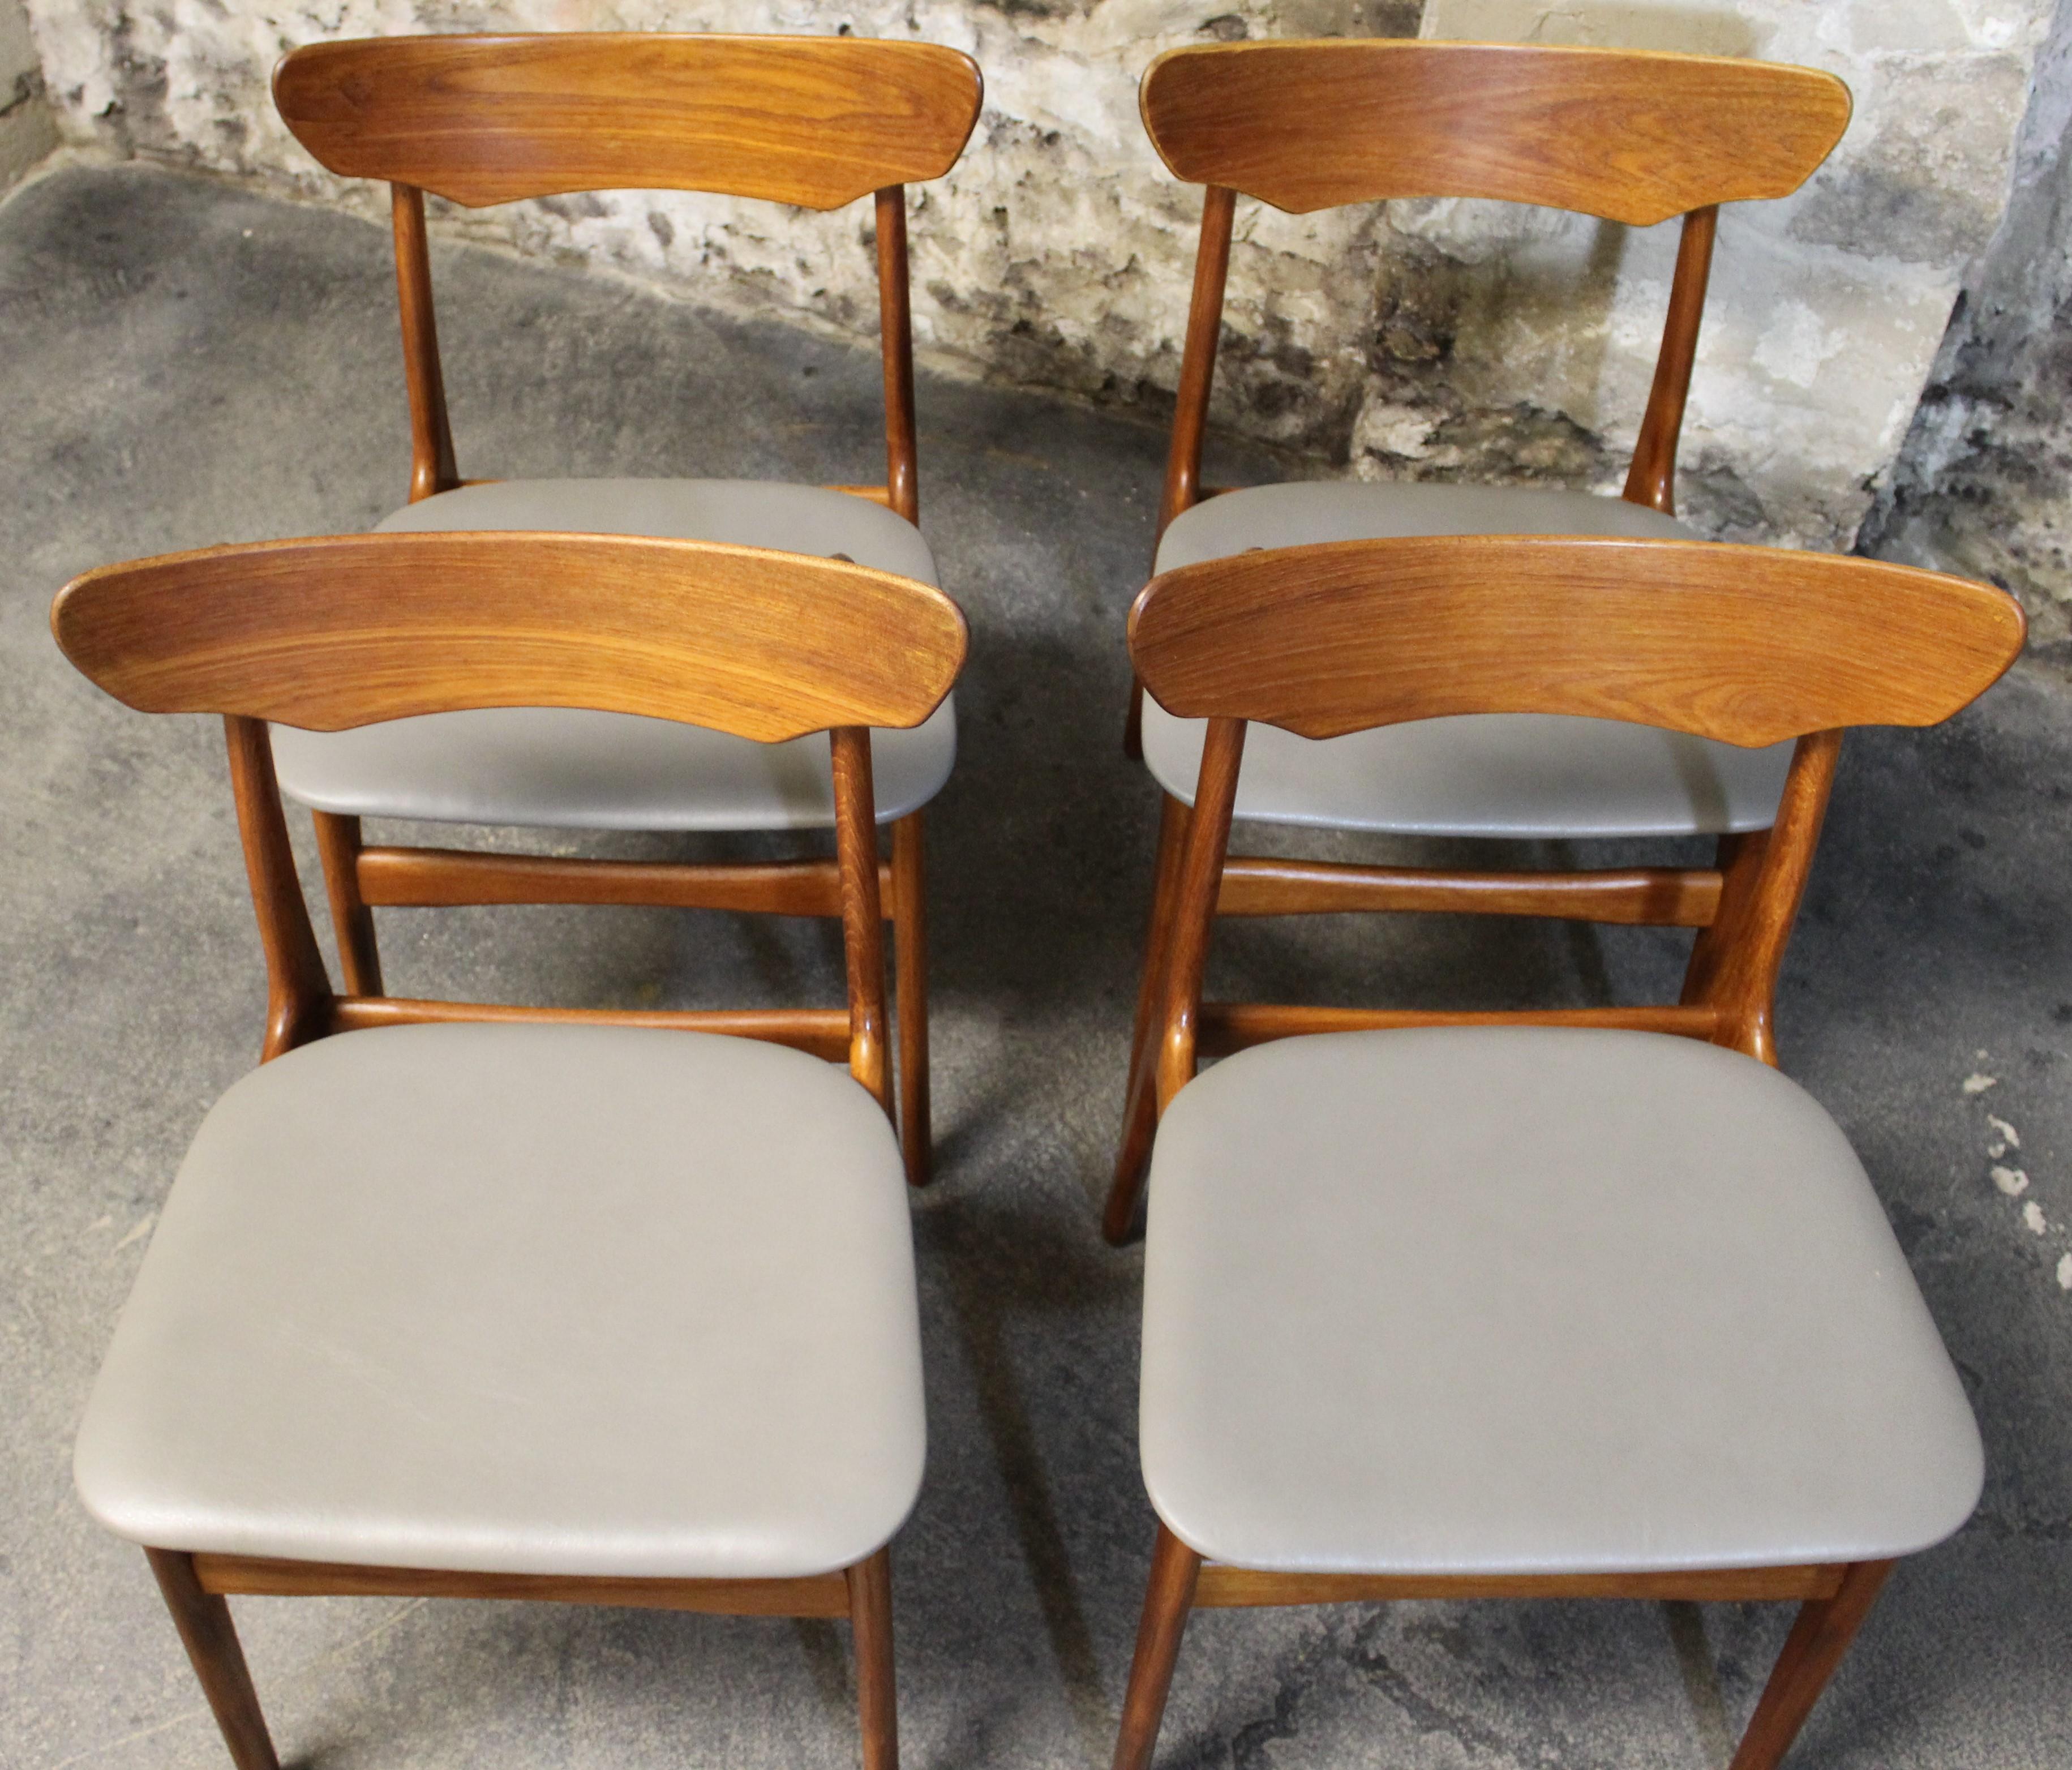 20th Century Four Danish Teak Dining Chairs by Schionning and Elgaard for Randers